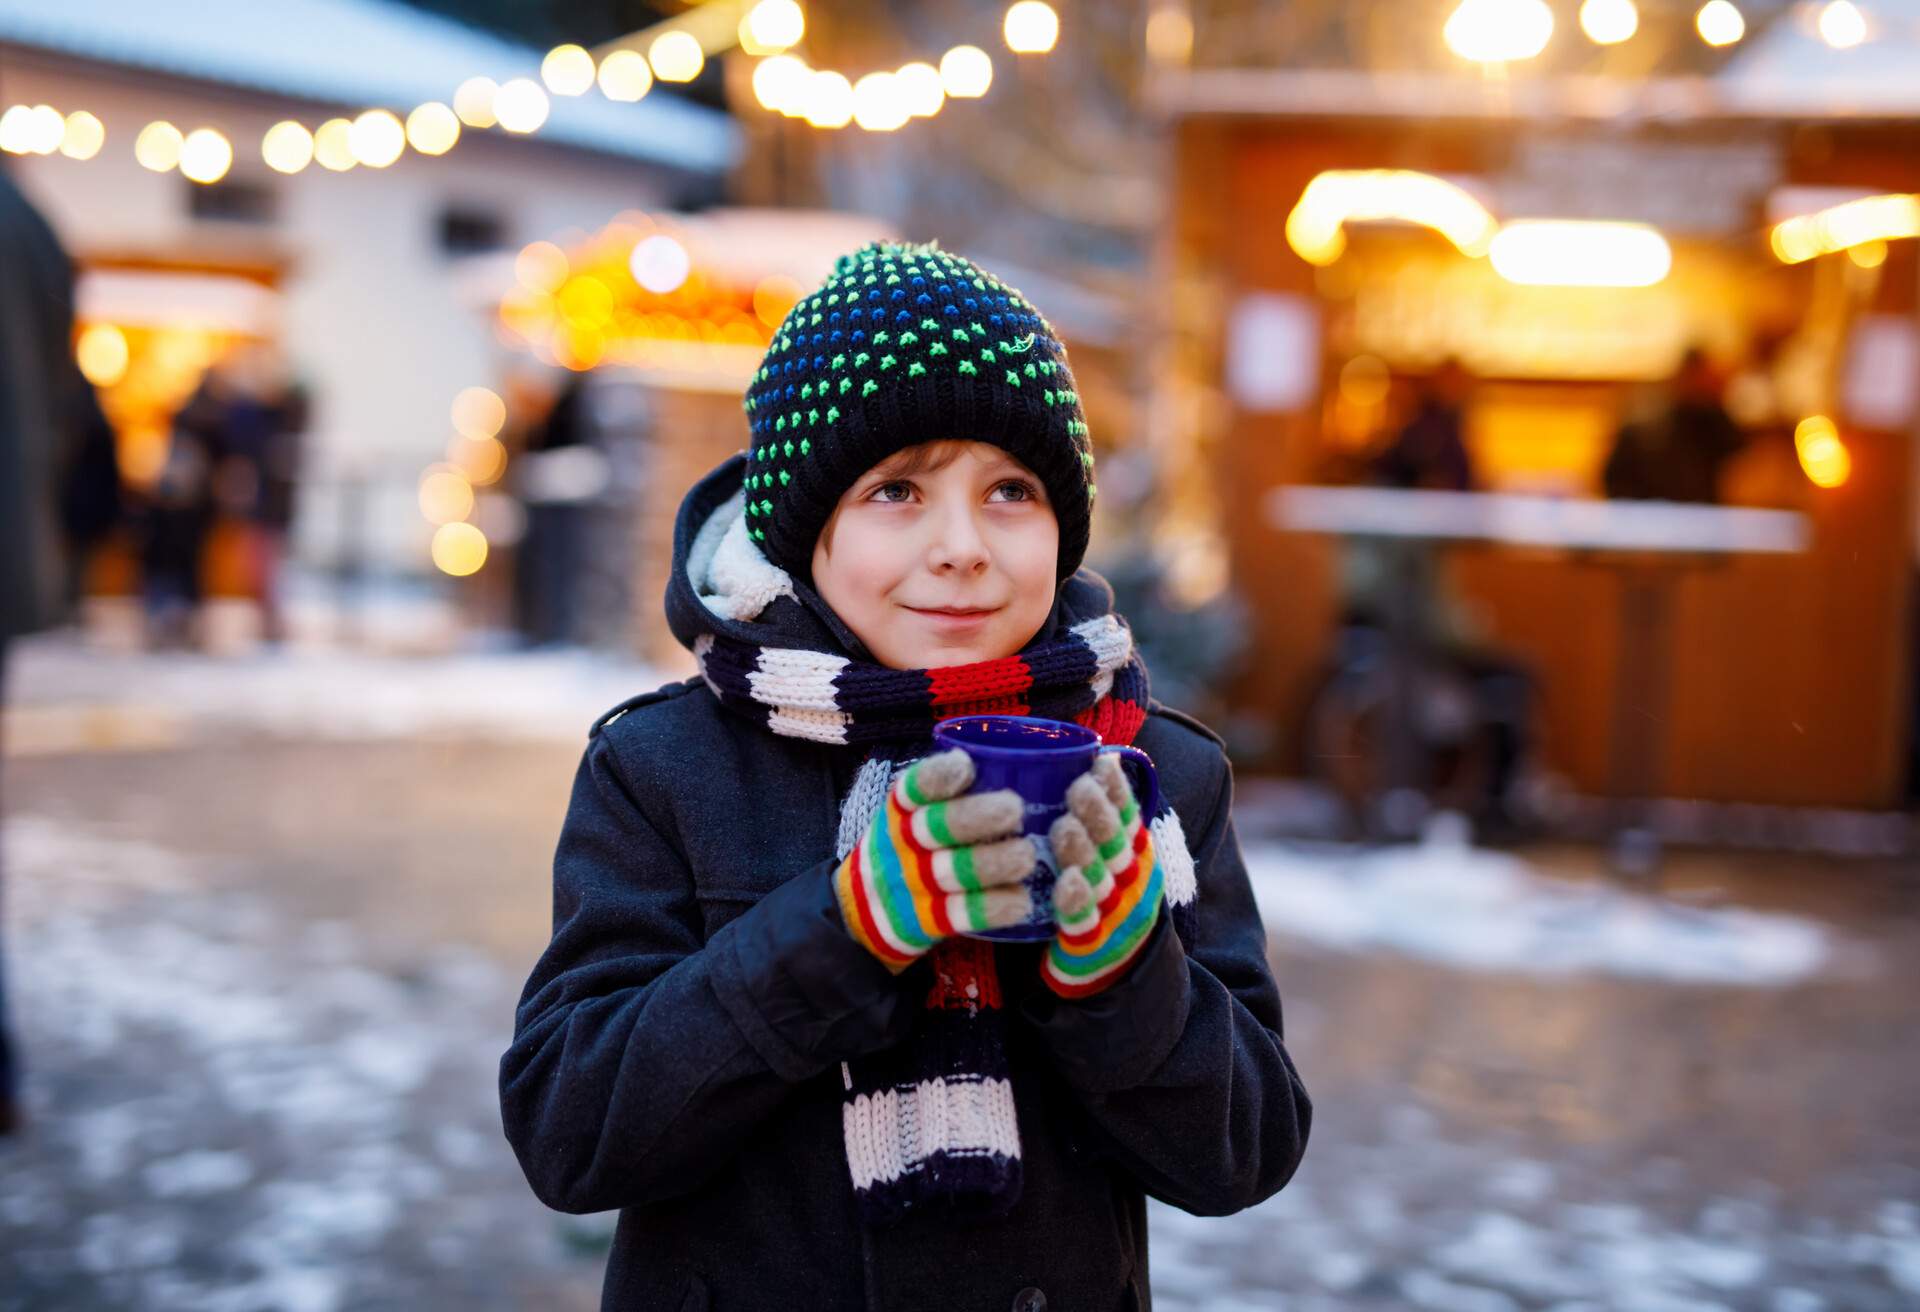 Little cute kid boy drinking hot children punch or chocolate on German Christmas market. Happy child on traditional family market in Germany, Laughing boy in colorful winter clothes.